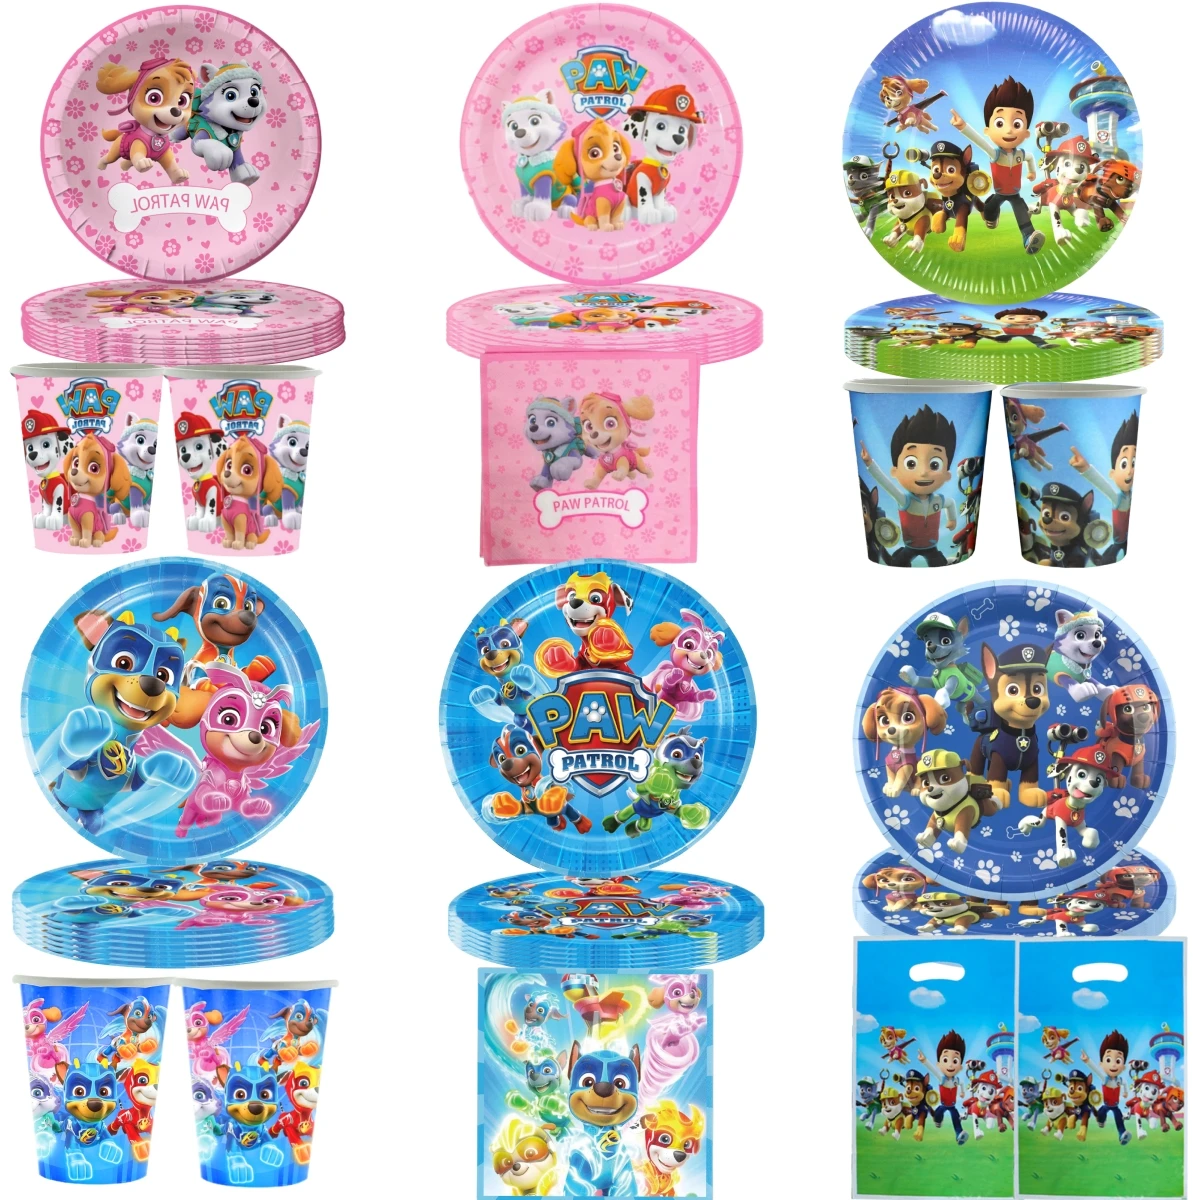 Paw Patrol Birthday Party Decor Disposable Tableware Tablecloth Cup Plate Napkin Dog Gift Bag Baby Shower Kid DIY Party Supplies pokemon birthday party decor disposable tableware tablecloth cup plate napkin pikachu balloons baby shower kids party supplies